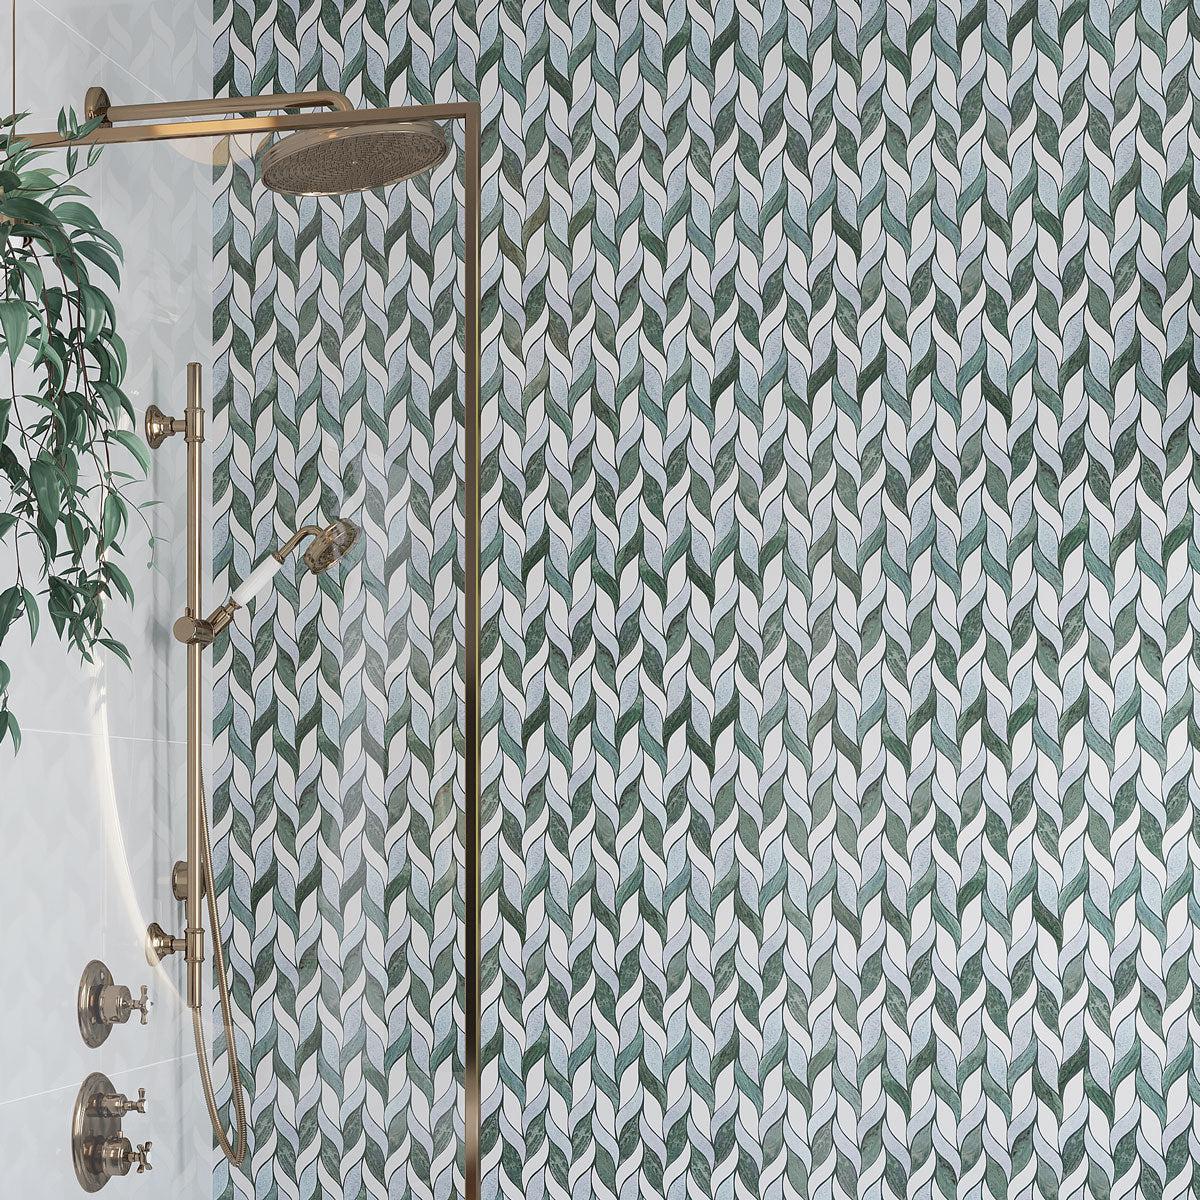 Envy Green and White Leaf Marble Mosaic Tile